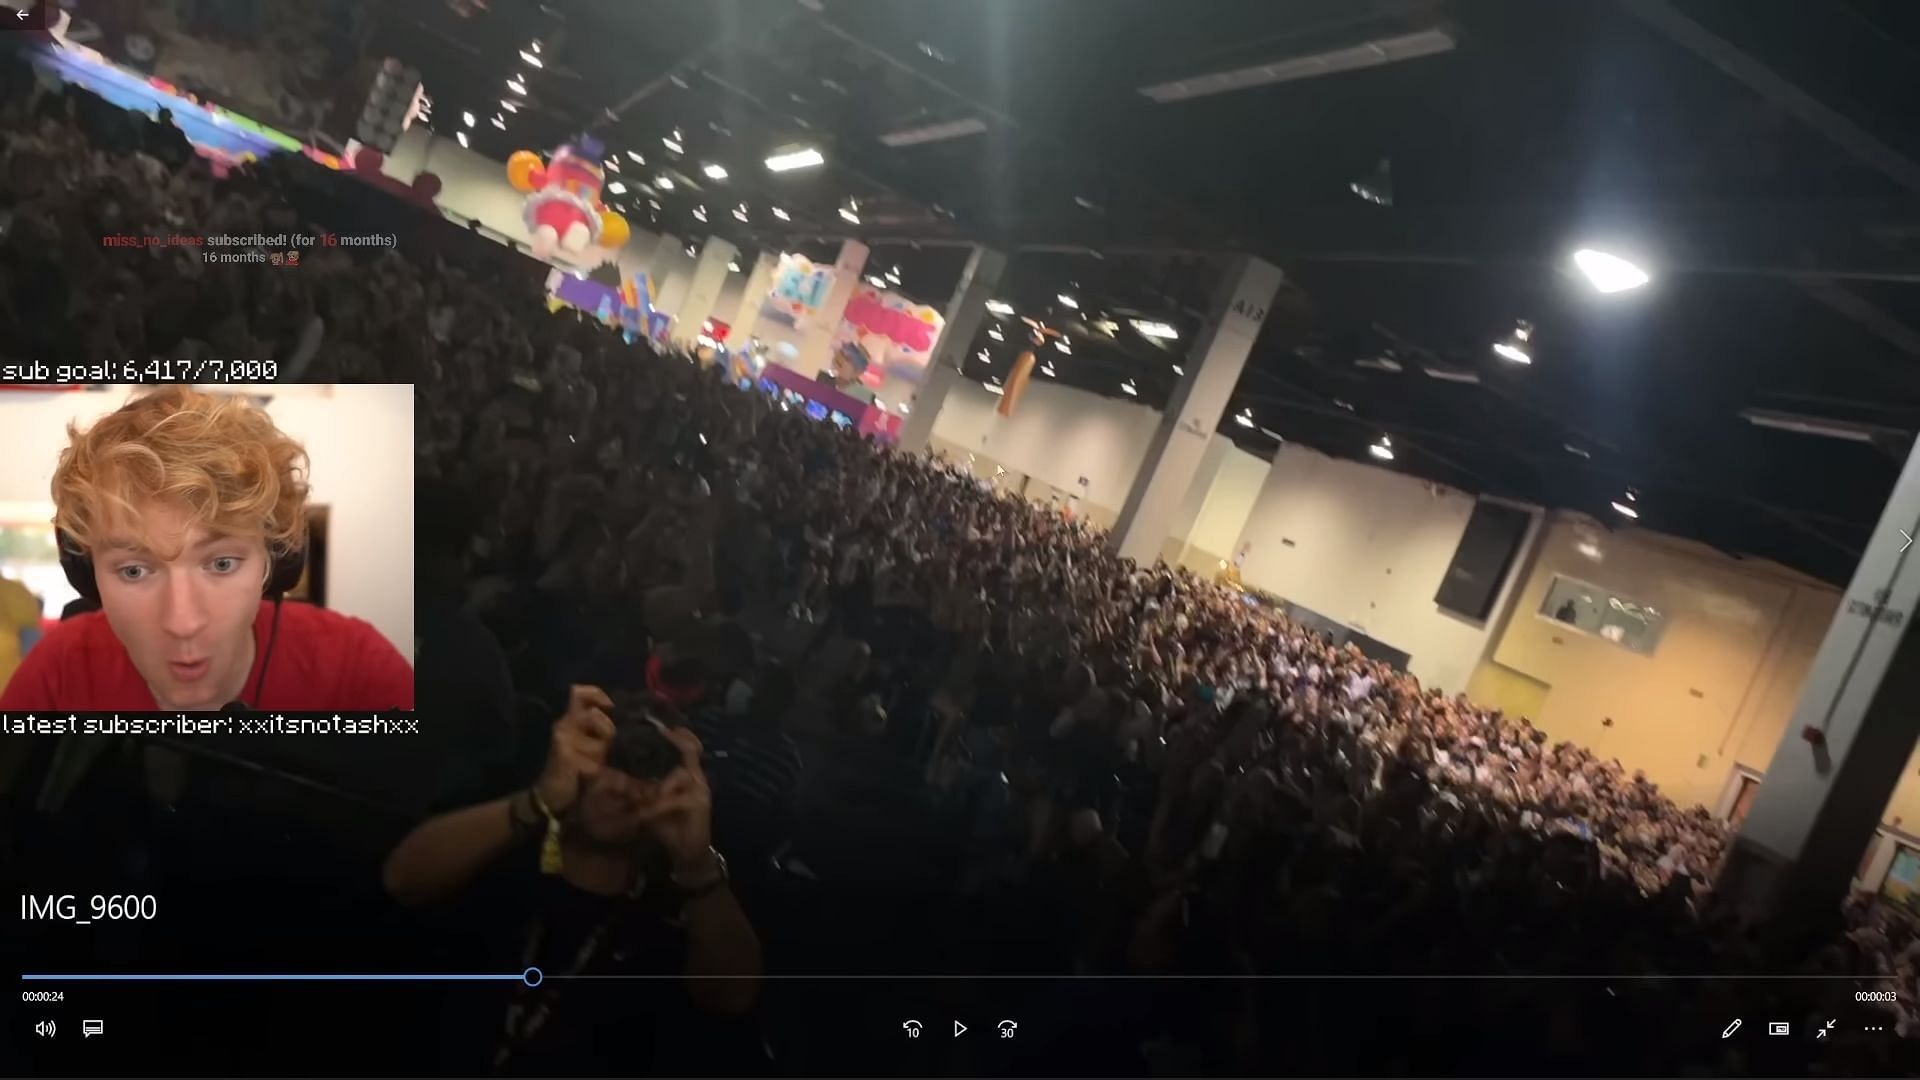 The streamer shows off the video he took during the event (Image via Canooon YouTube)